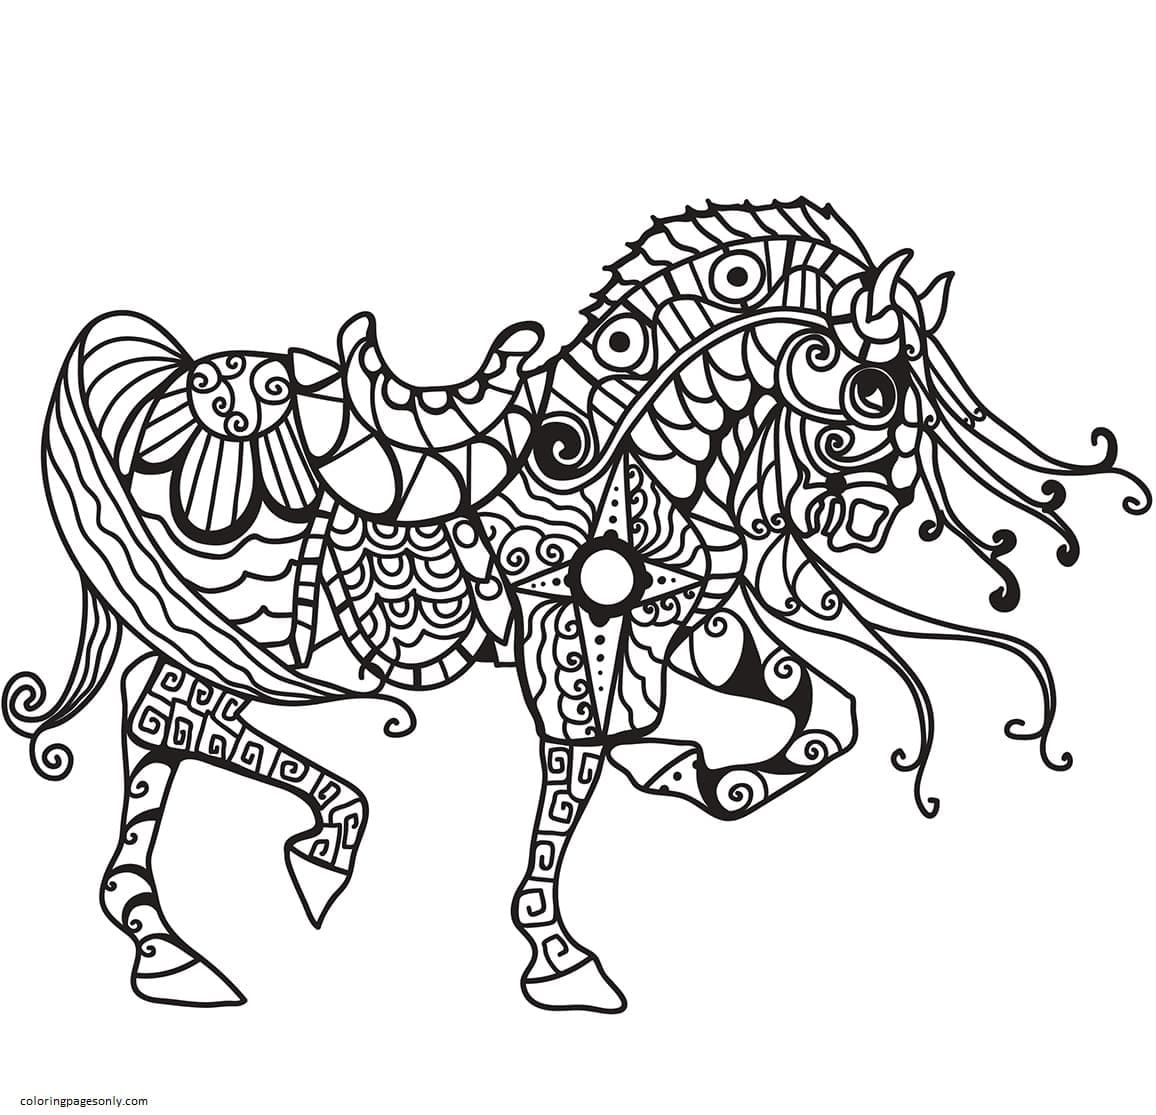 horse zentangle coloring pages teenage coloring pages coloring pages for kids and adults